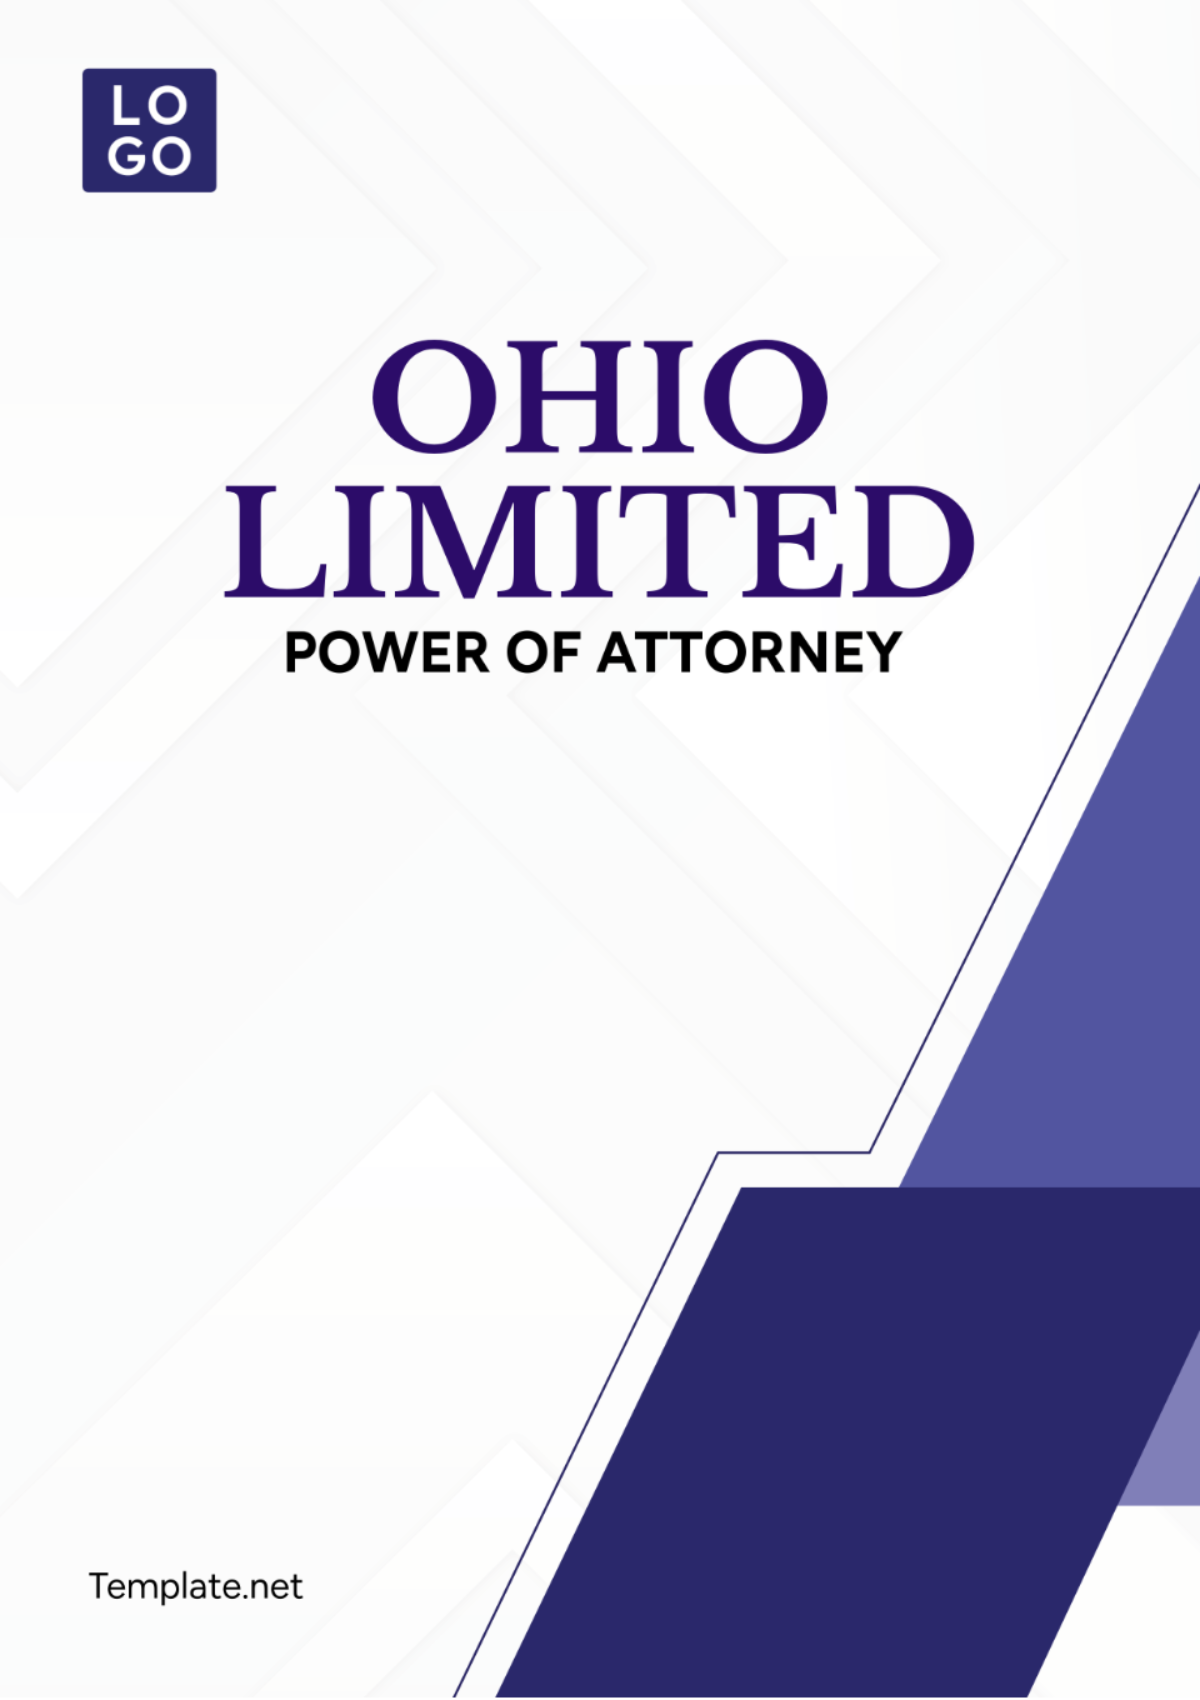 Ohio Limited Power of Attorney Template